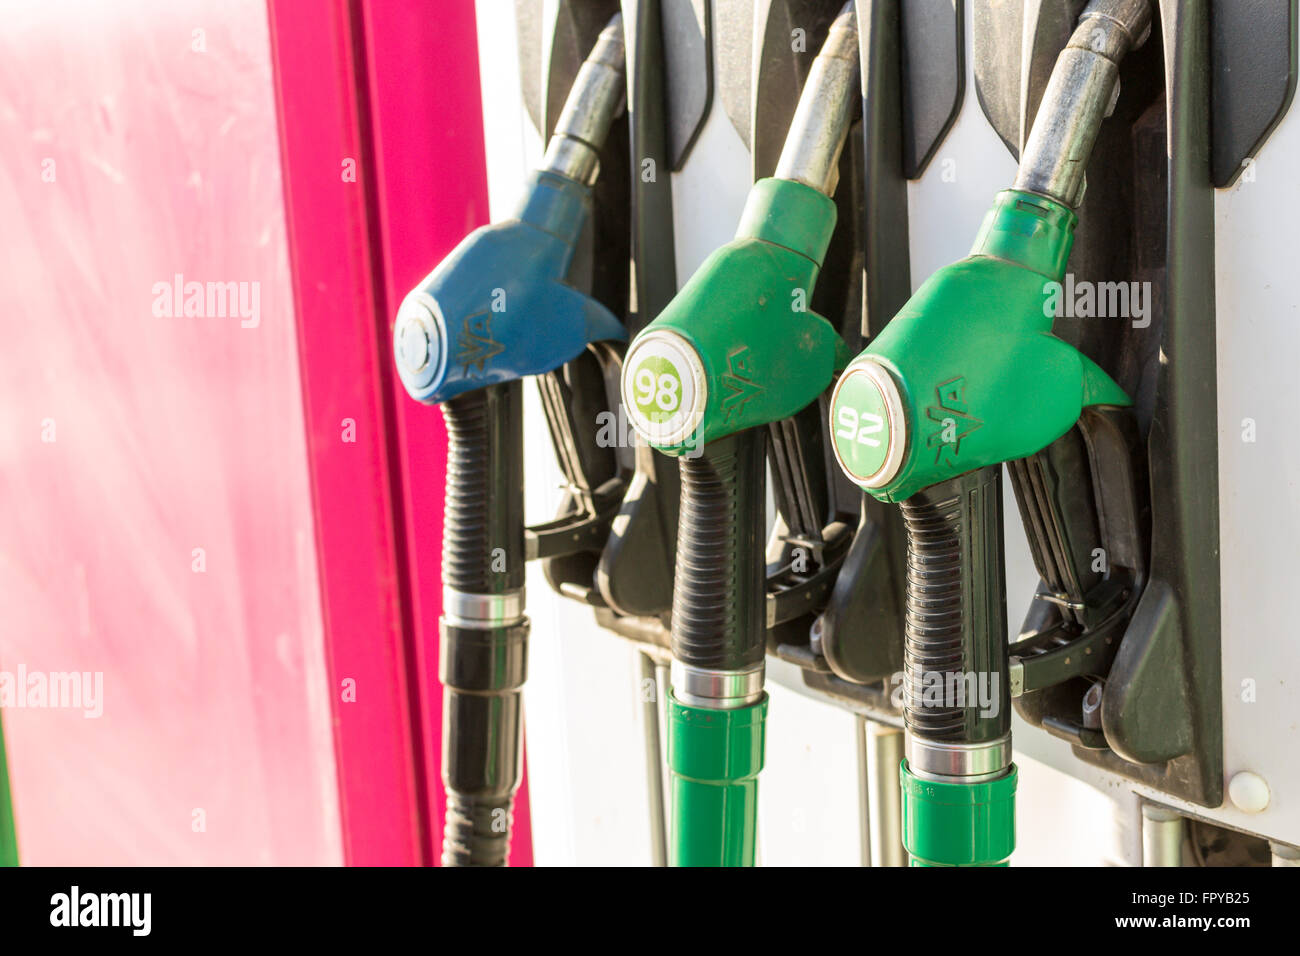 UFA - RUSSIA 13TH FEBRUARY 2016 - Gasoline hand pumps on display at a local gas station in Ufa Russia giving car drivers a choic Stock Photo